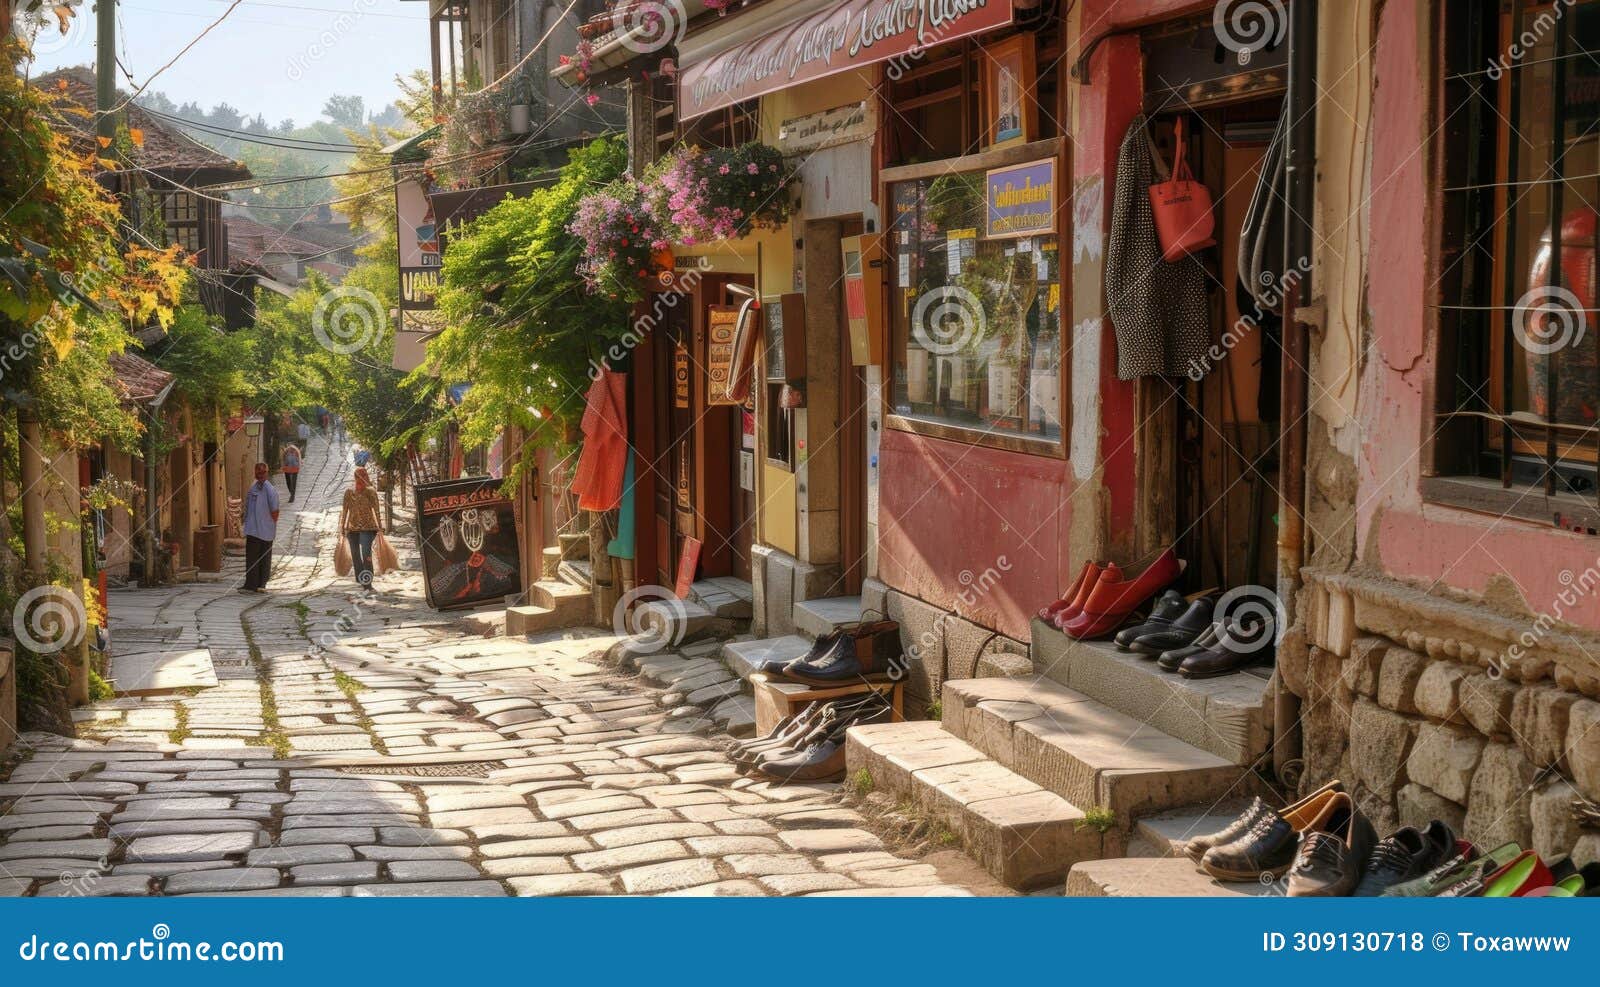 quaint old town street with cobblestone path and storefronts